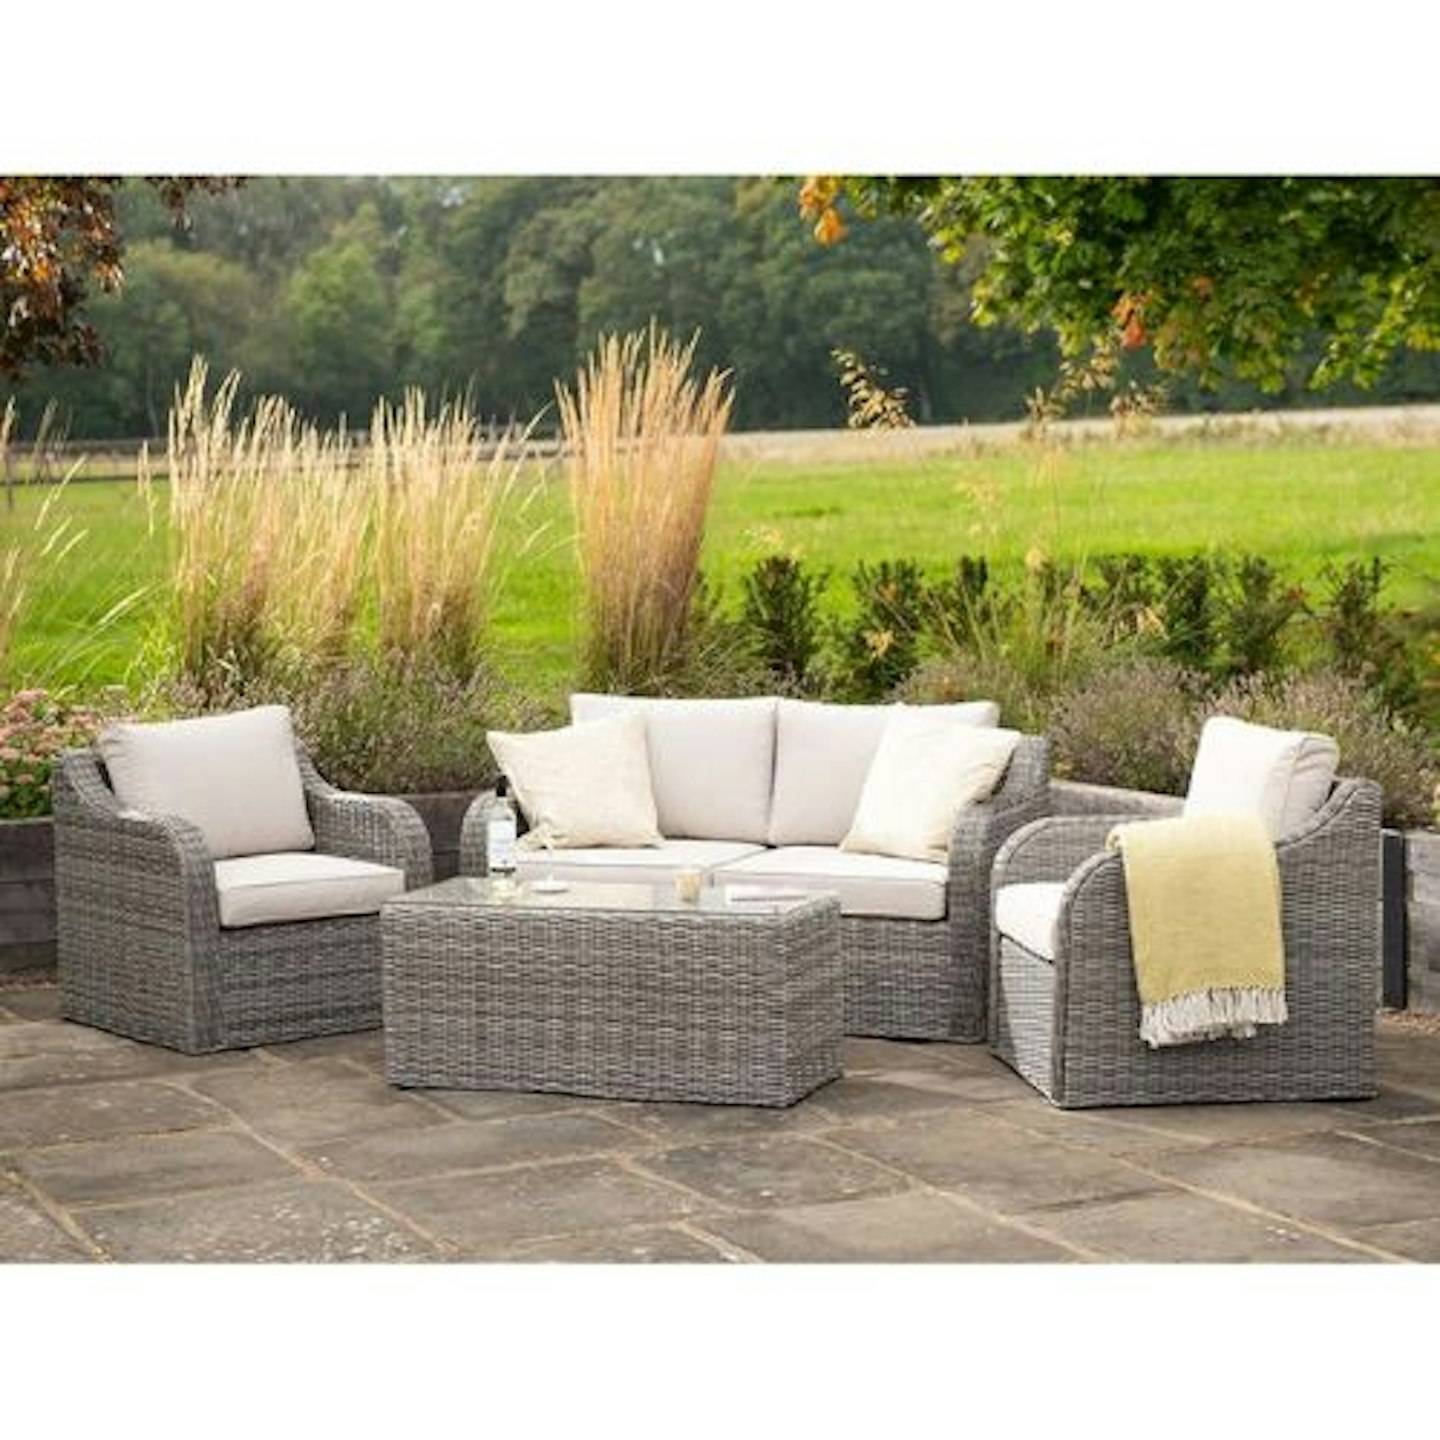 Luxury Rattan 4 Seater Sofa Set with Coffee Table in Stone 